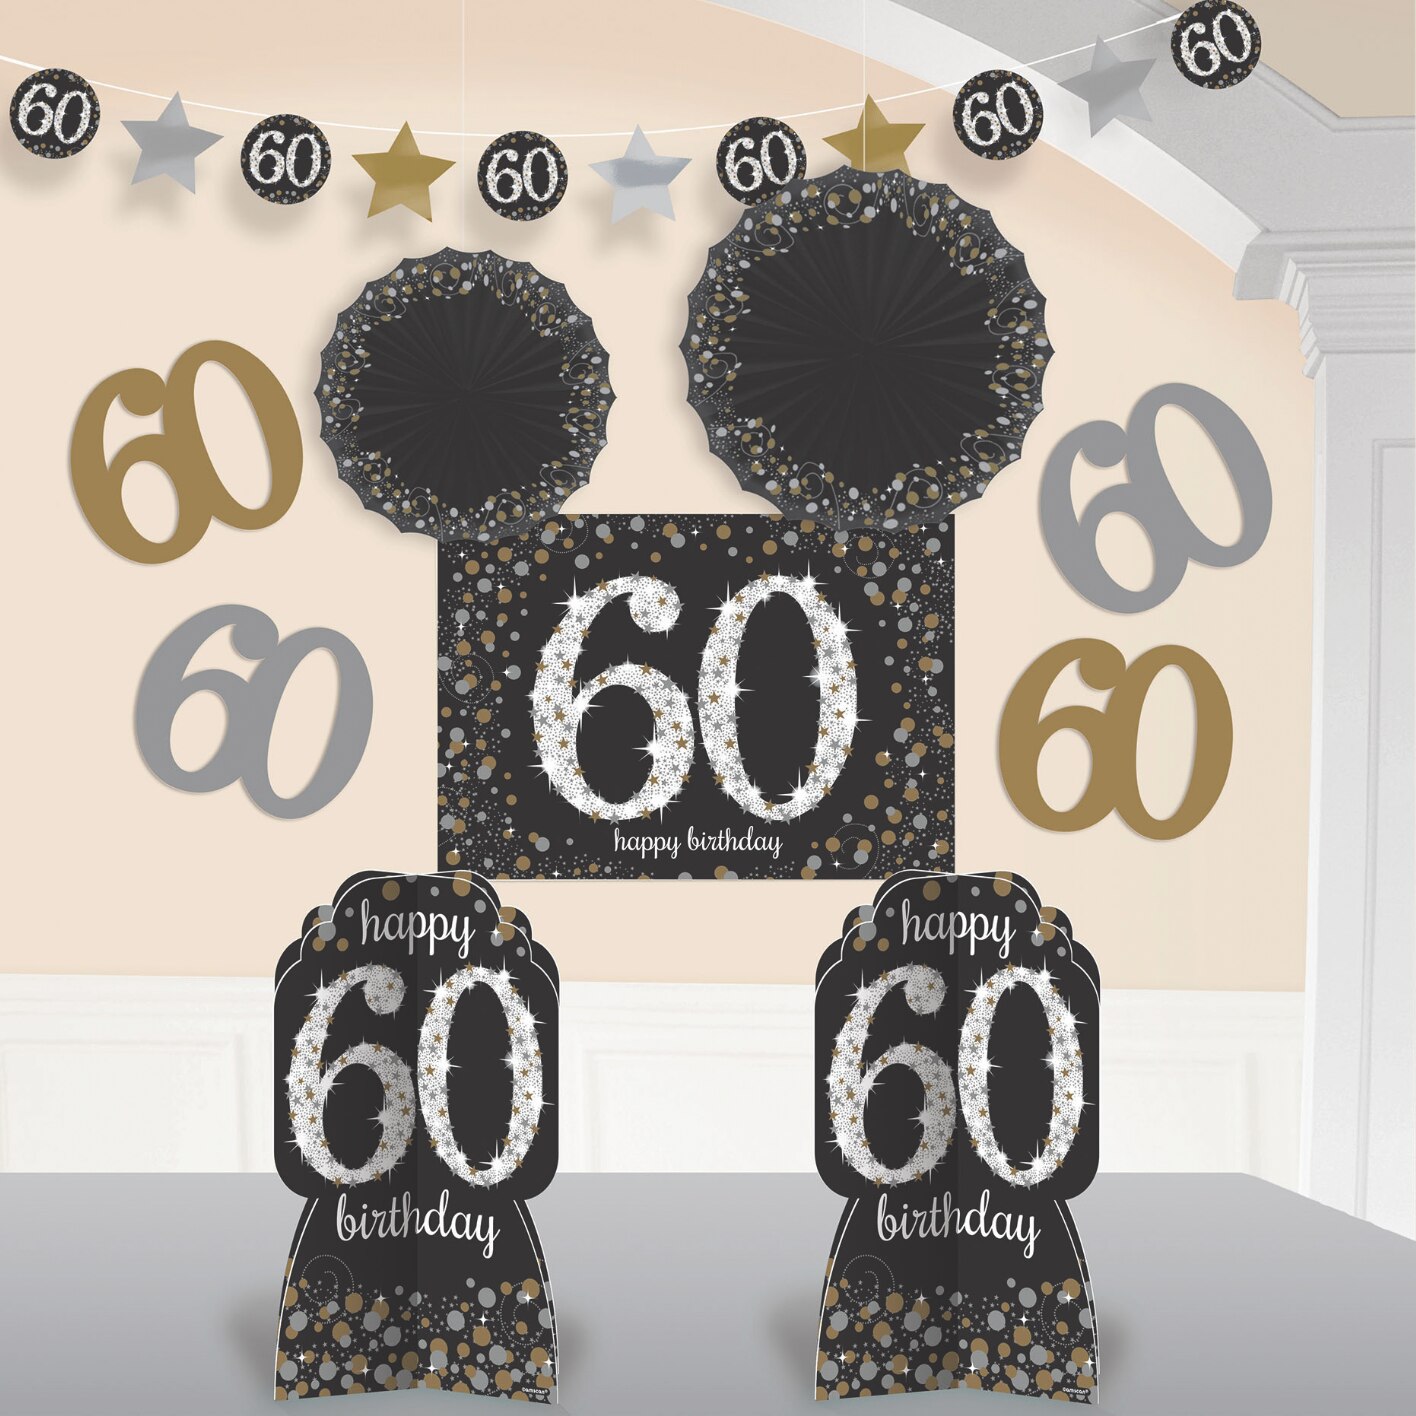 Various black, white, and gold 60th birthday decorations. 